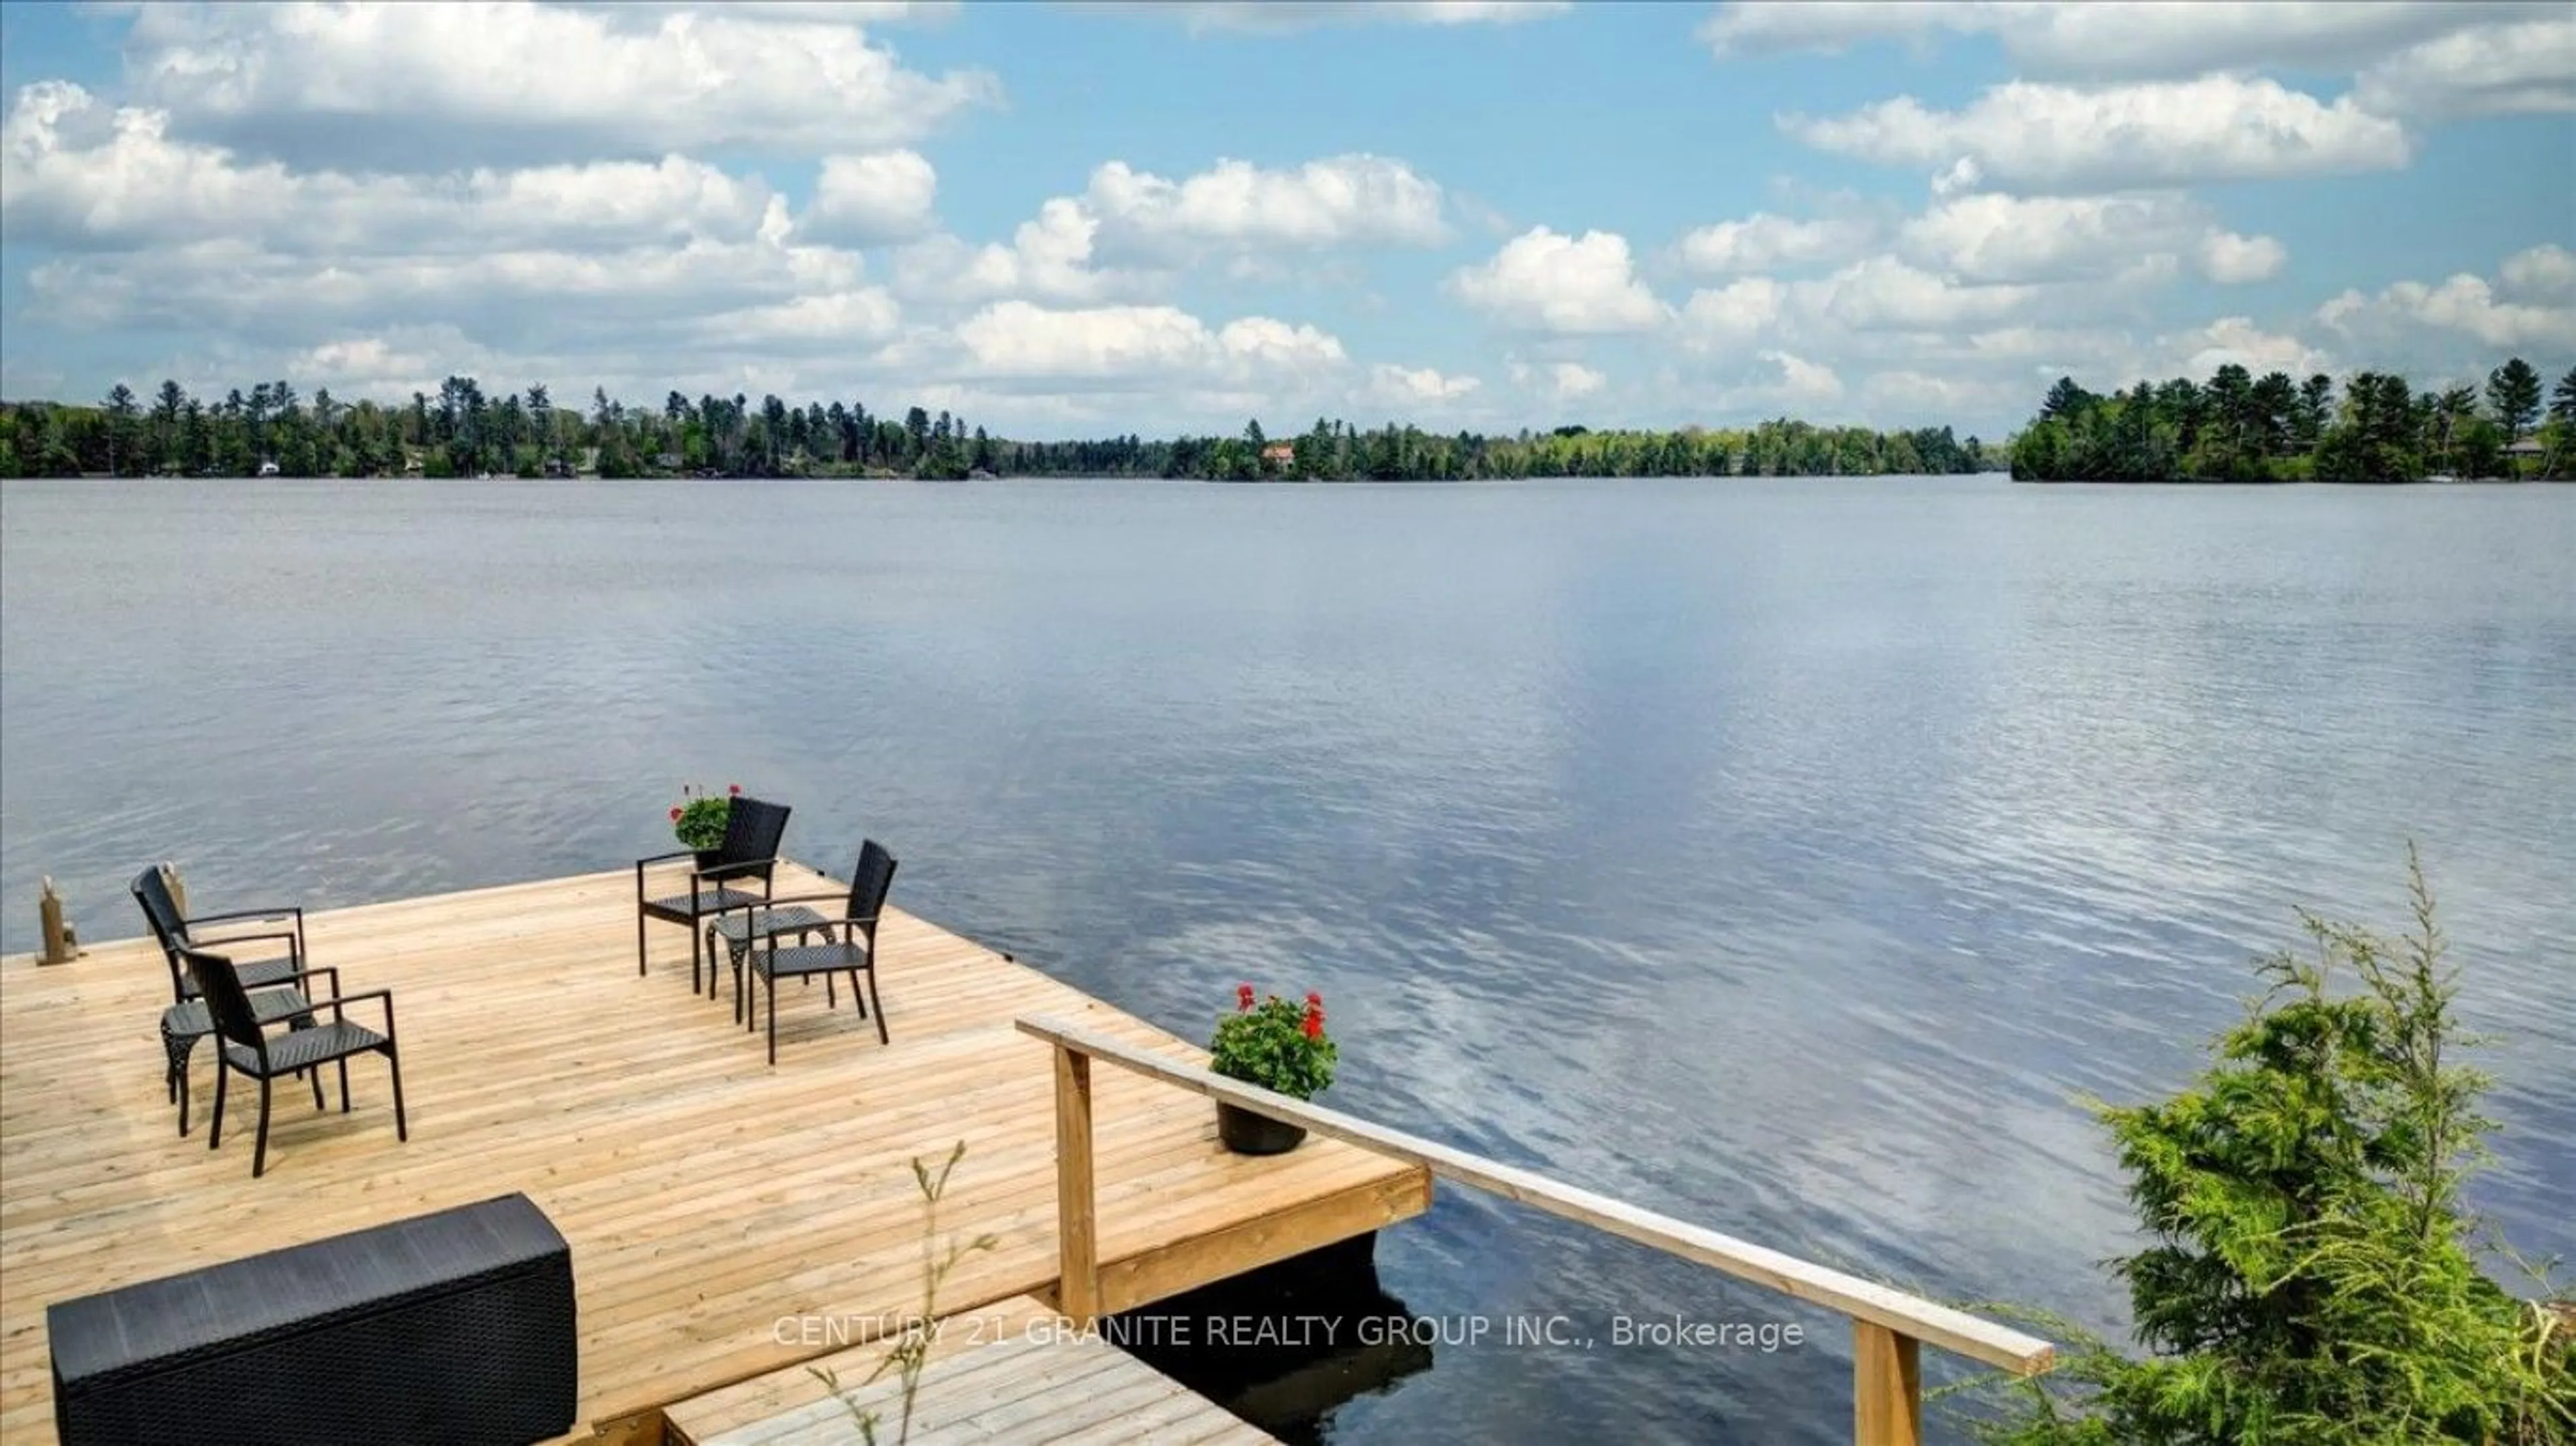 Lakeview for 1115A Steenburg Lake North Rd, Limerick Ontario K0L 1W0